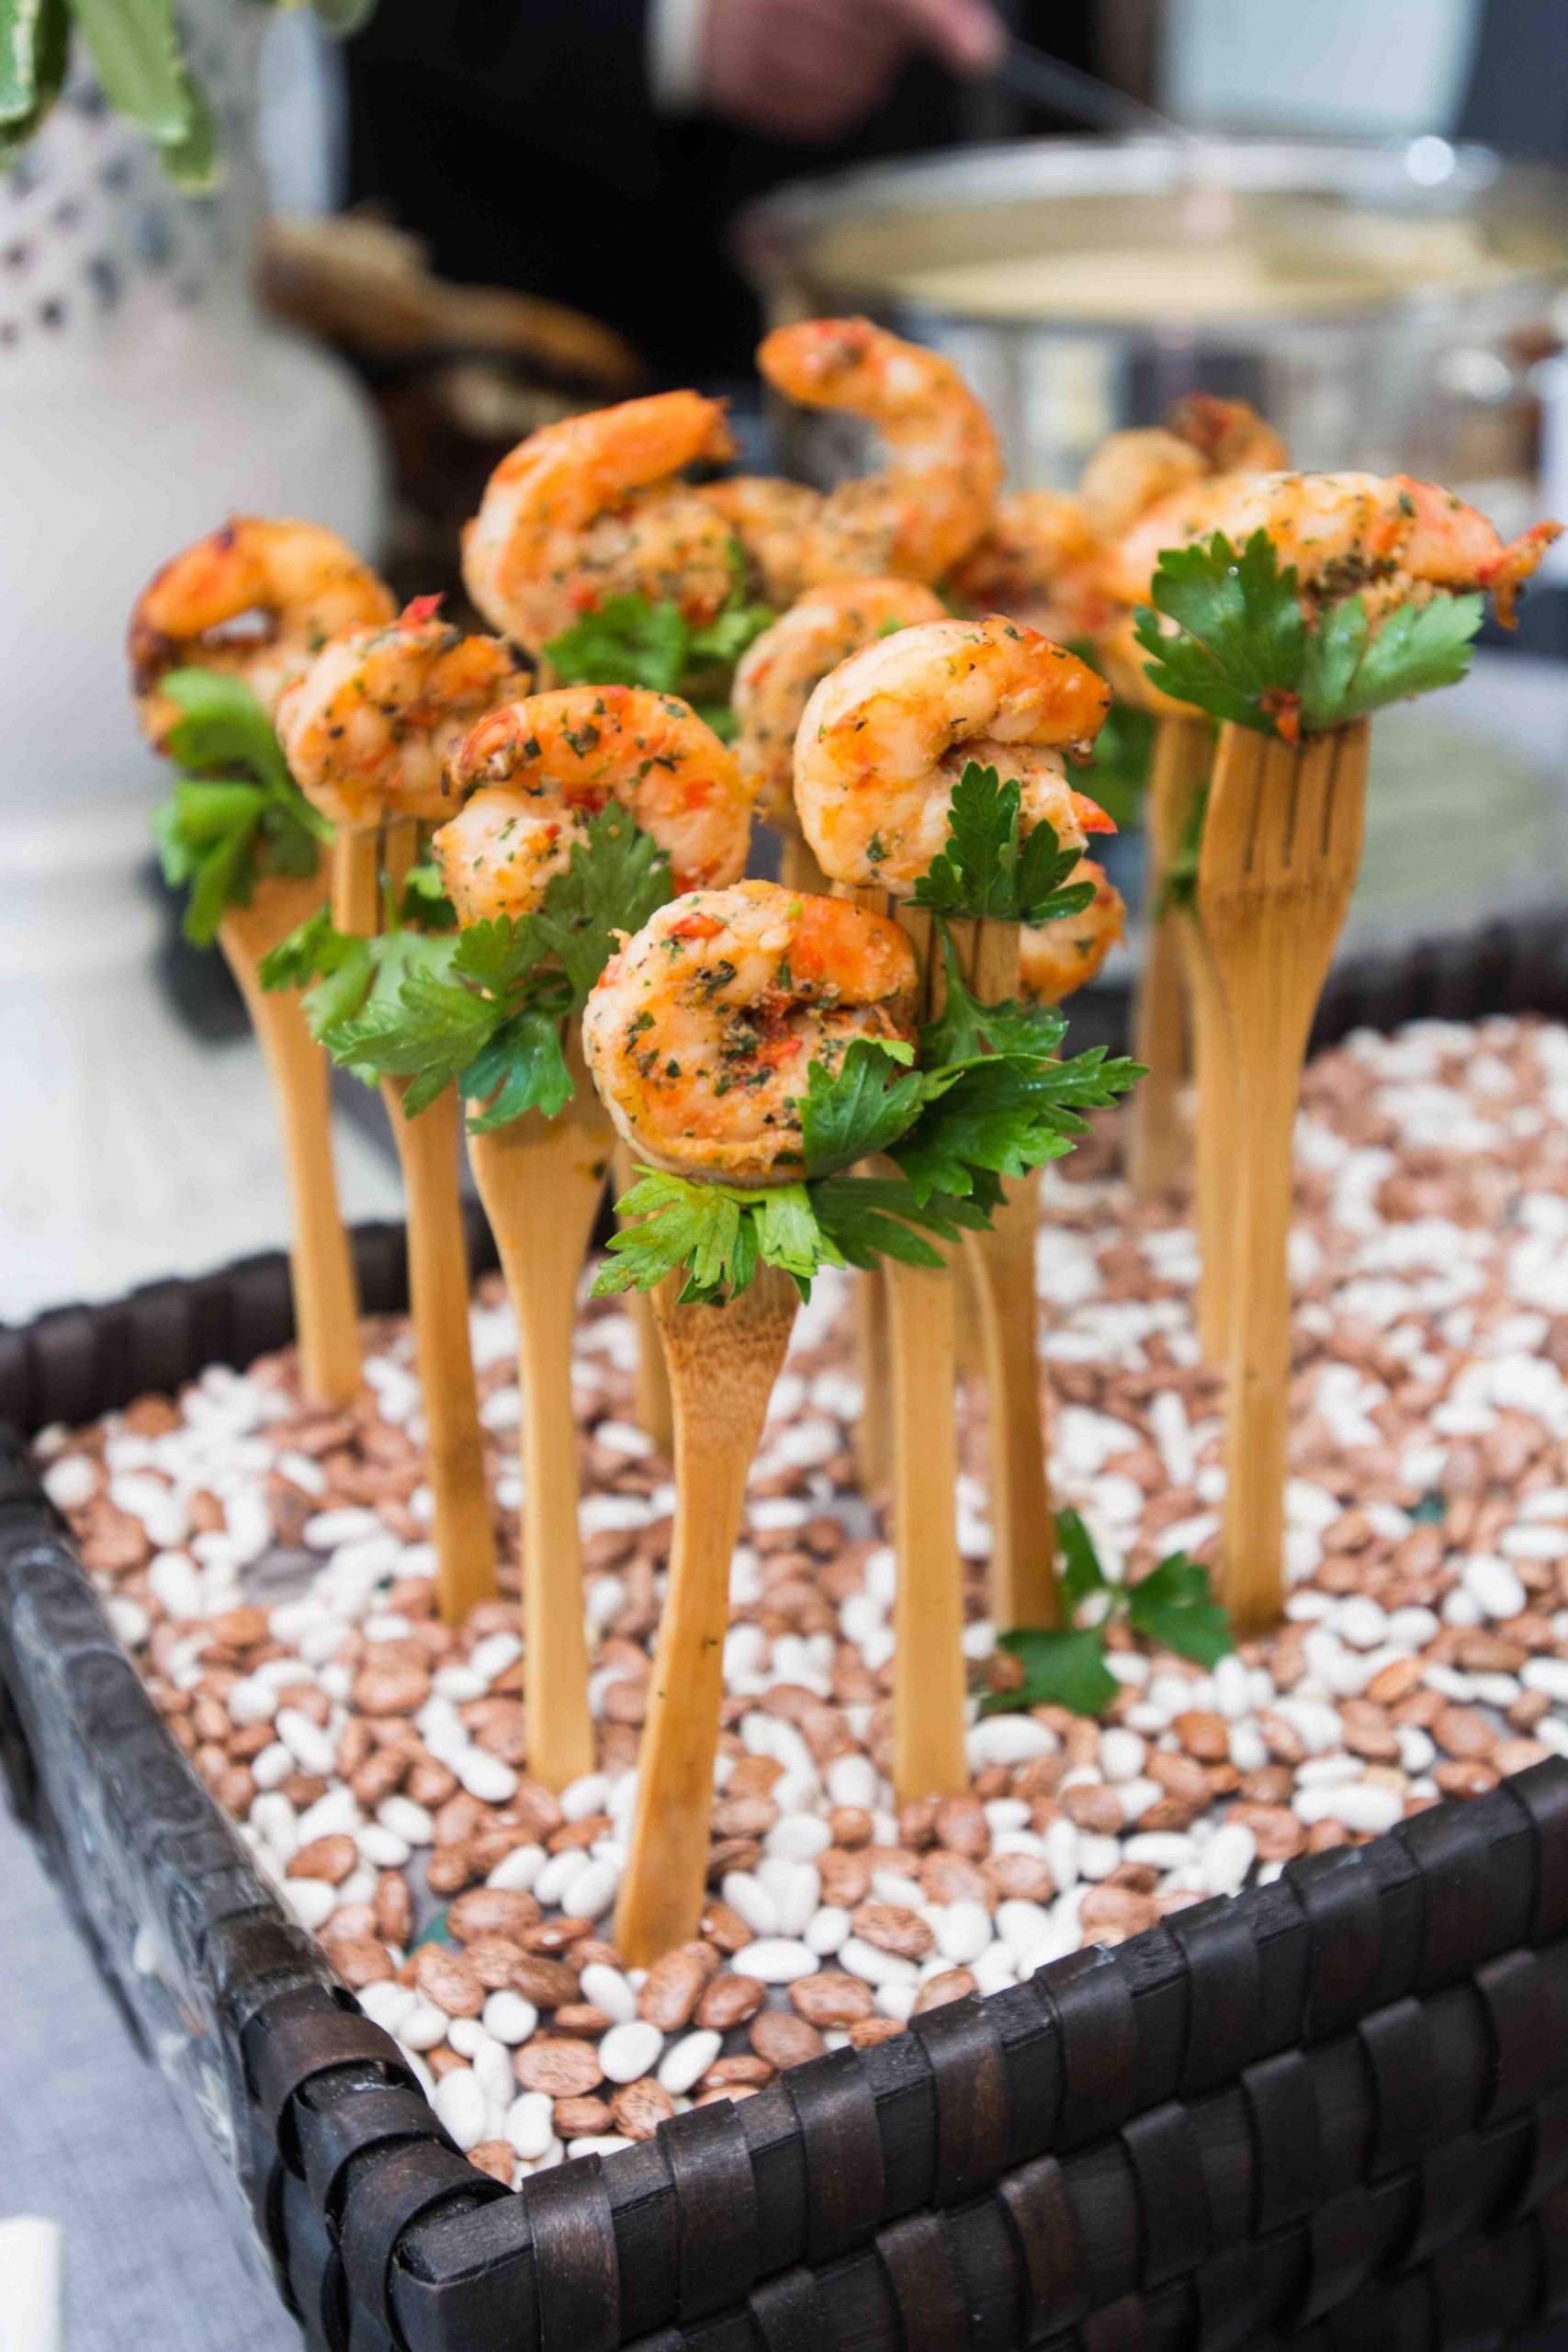 Best Seafood Appetizer
 Wooden forks were displayed upright on a bed of beans and